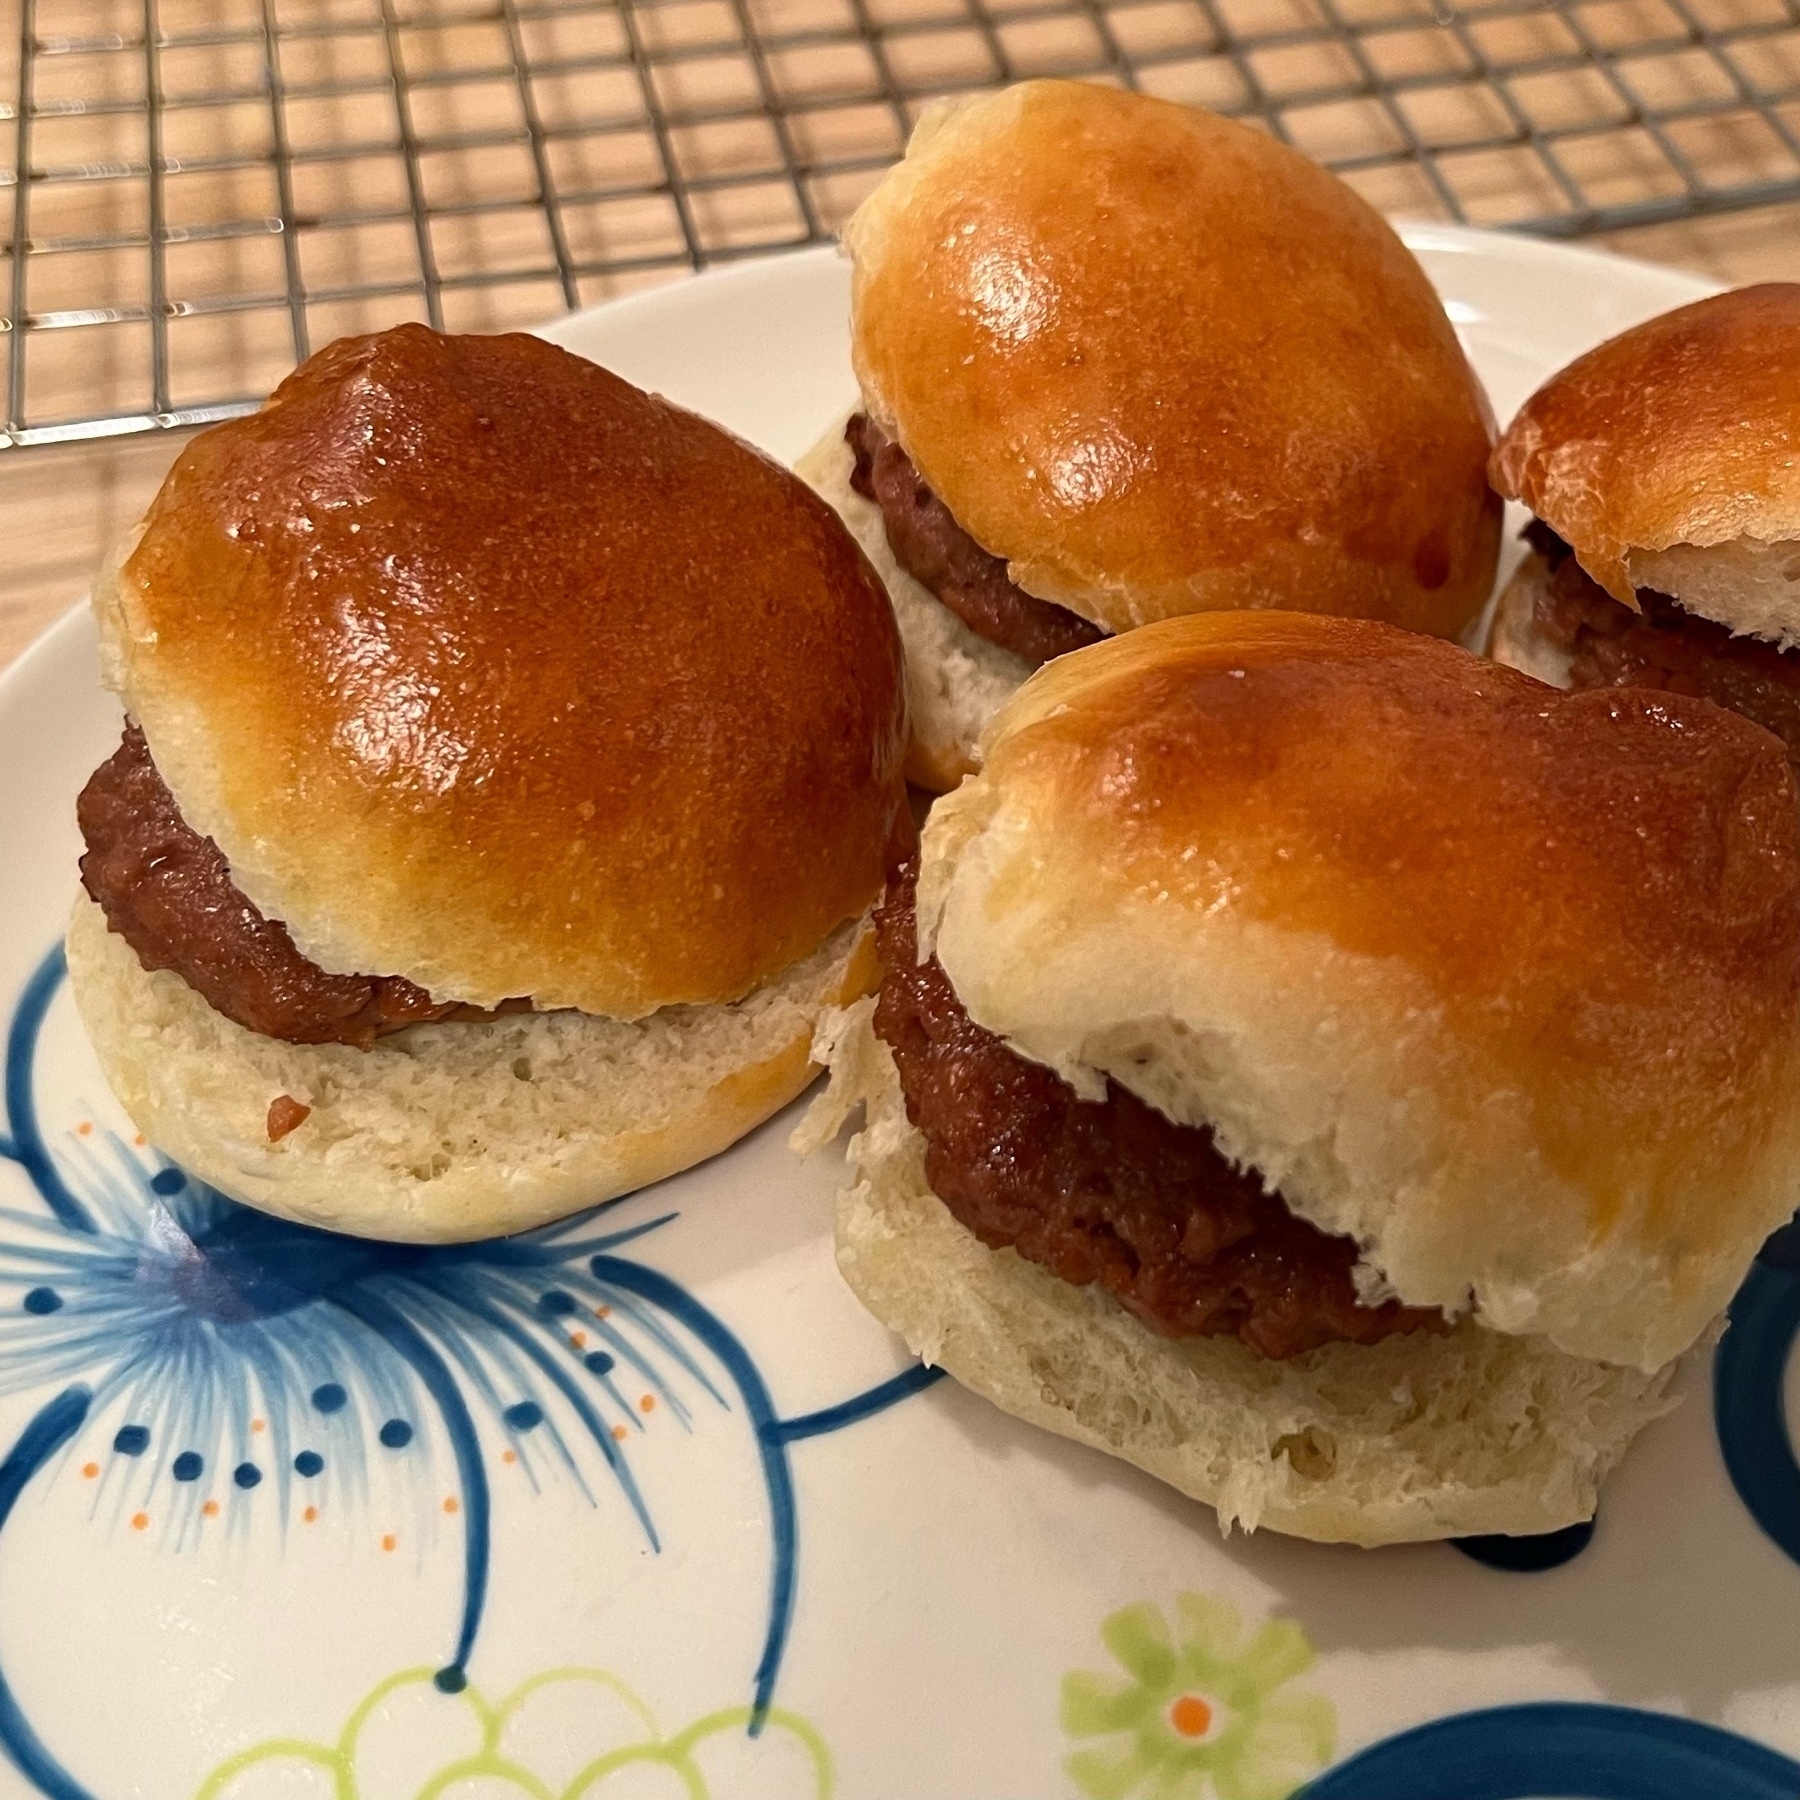 Tiny buns with tiny burgers in them